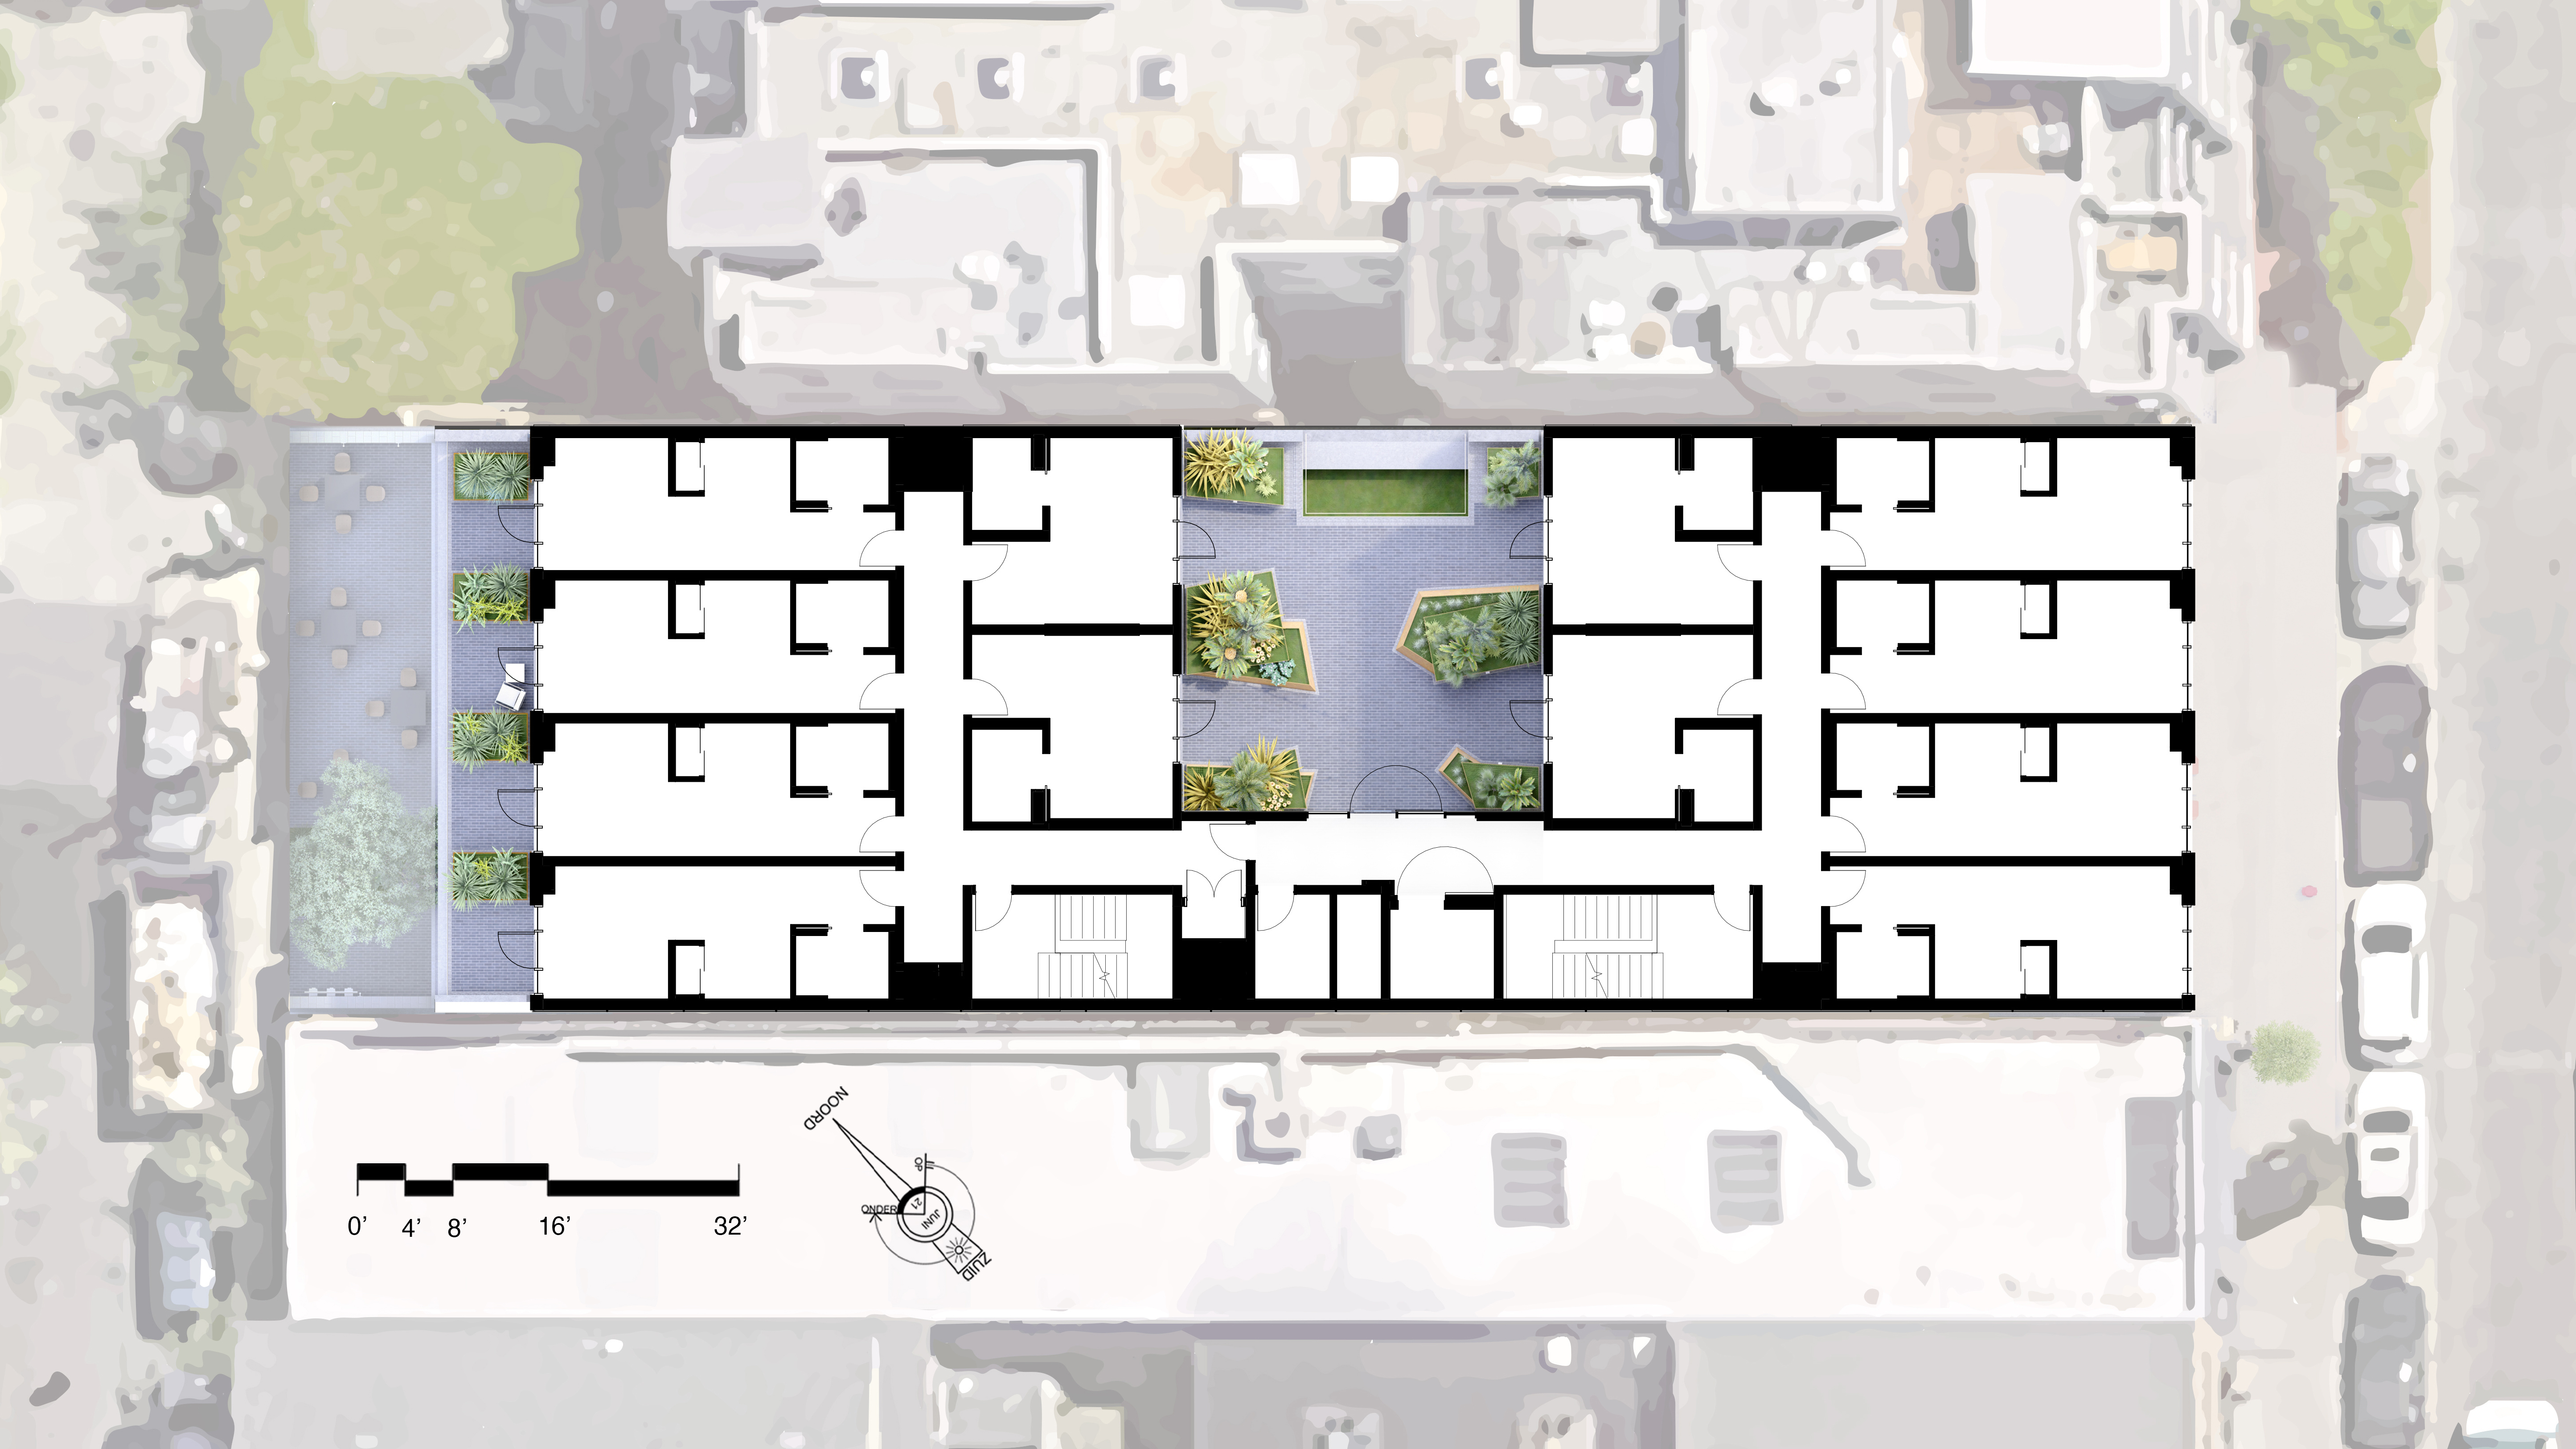 Level three site plan of Ome in San Francisco.